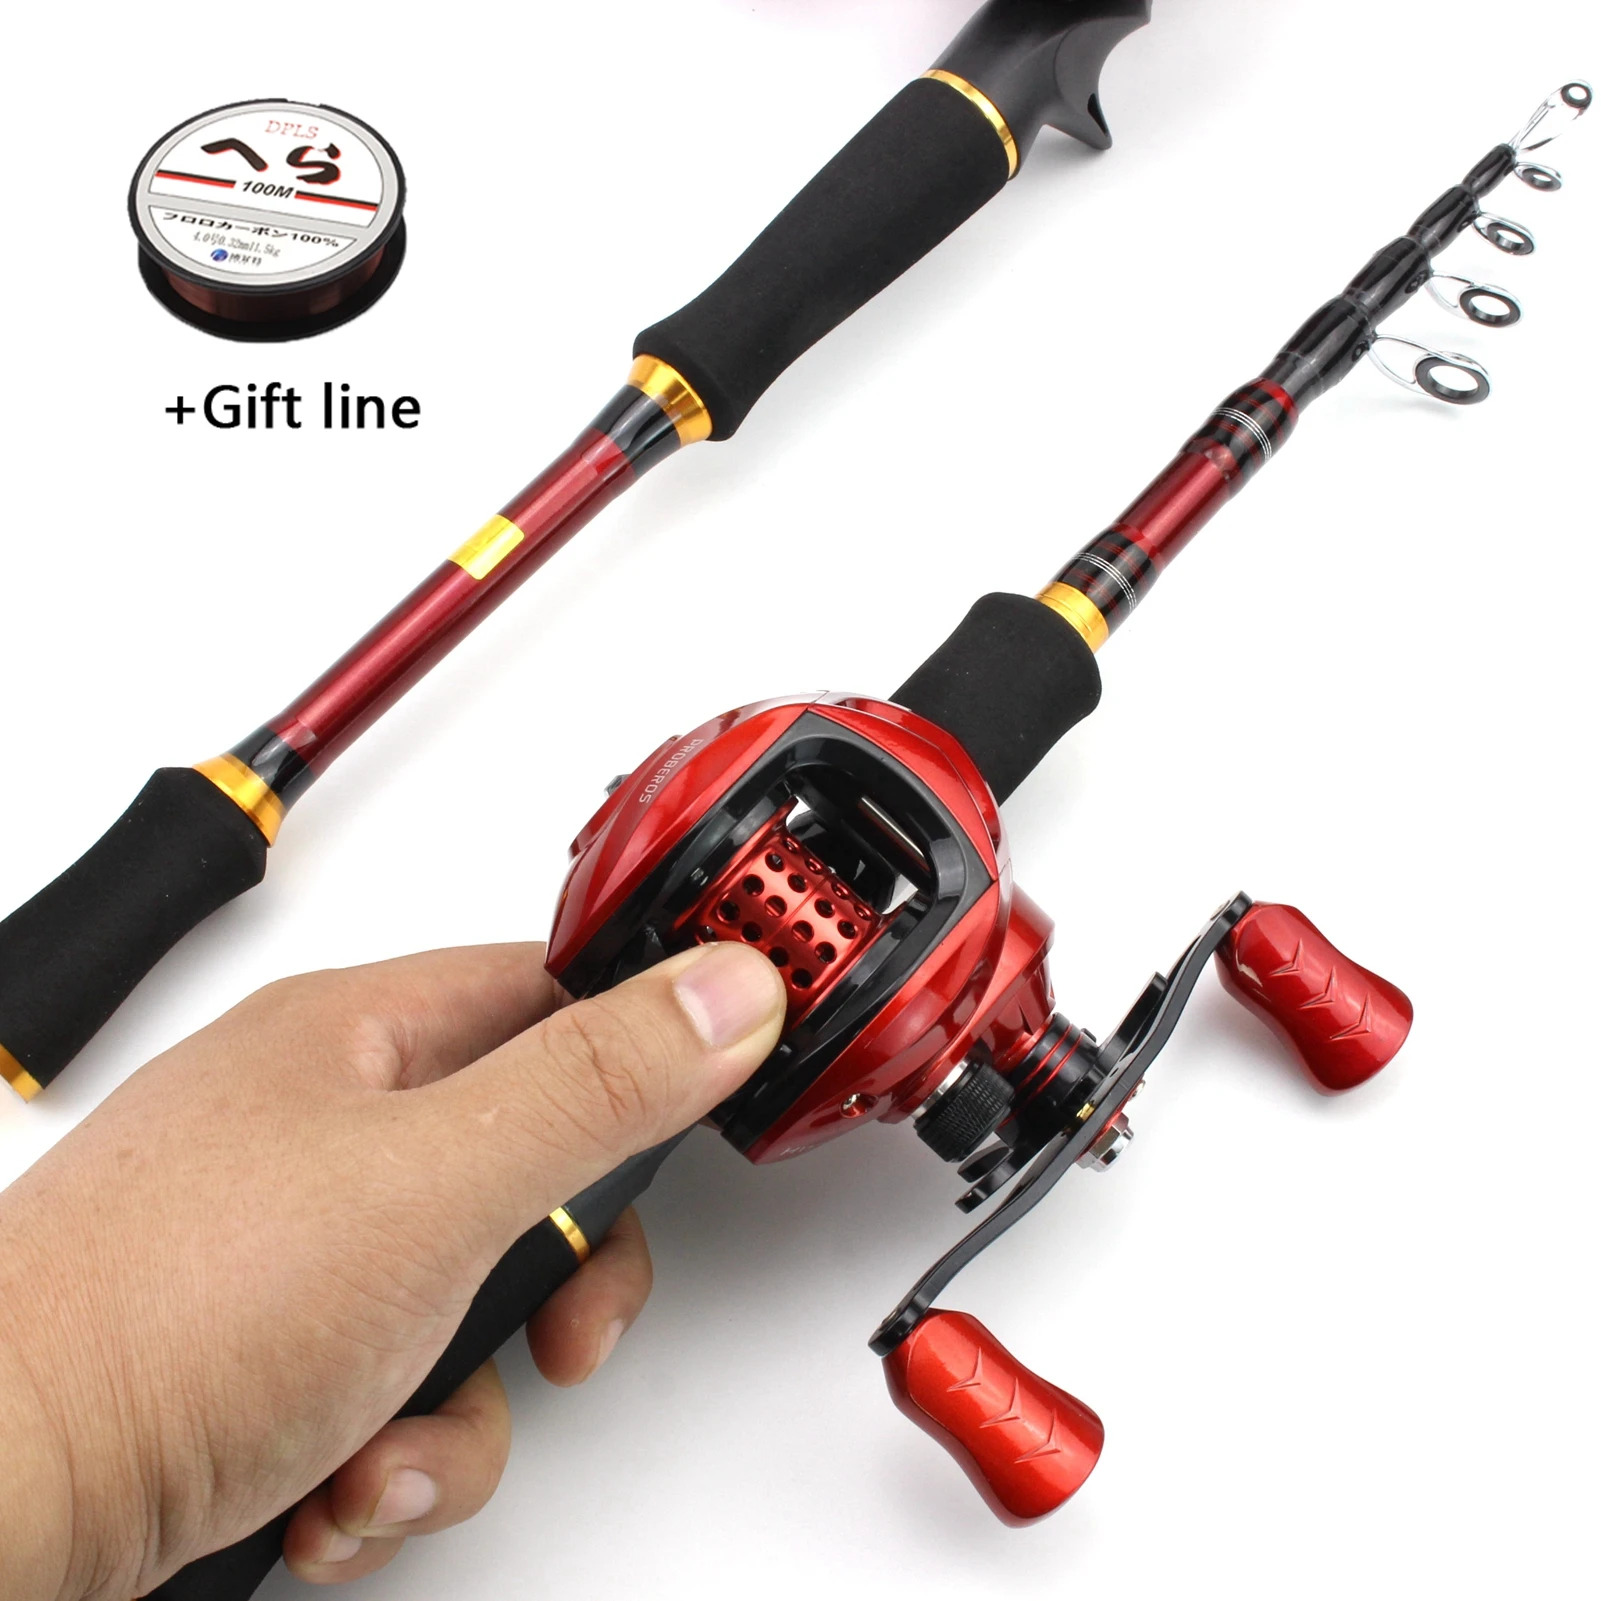 https://ae01.alicdn.com/kf/Hf4de268ec6fa4be0be4195427974ba40U/NEW-1-8m2-1m2-4m2-7m-Portable-Travel-Outdoor-sports-telescopic-fishing-rod-and-Spinning-Reels.jpg